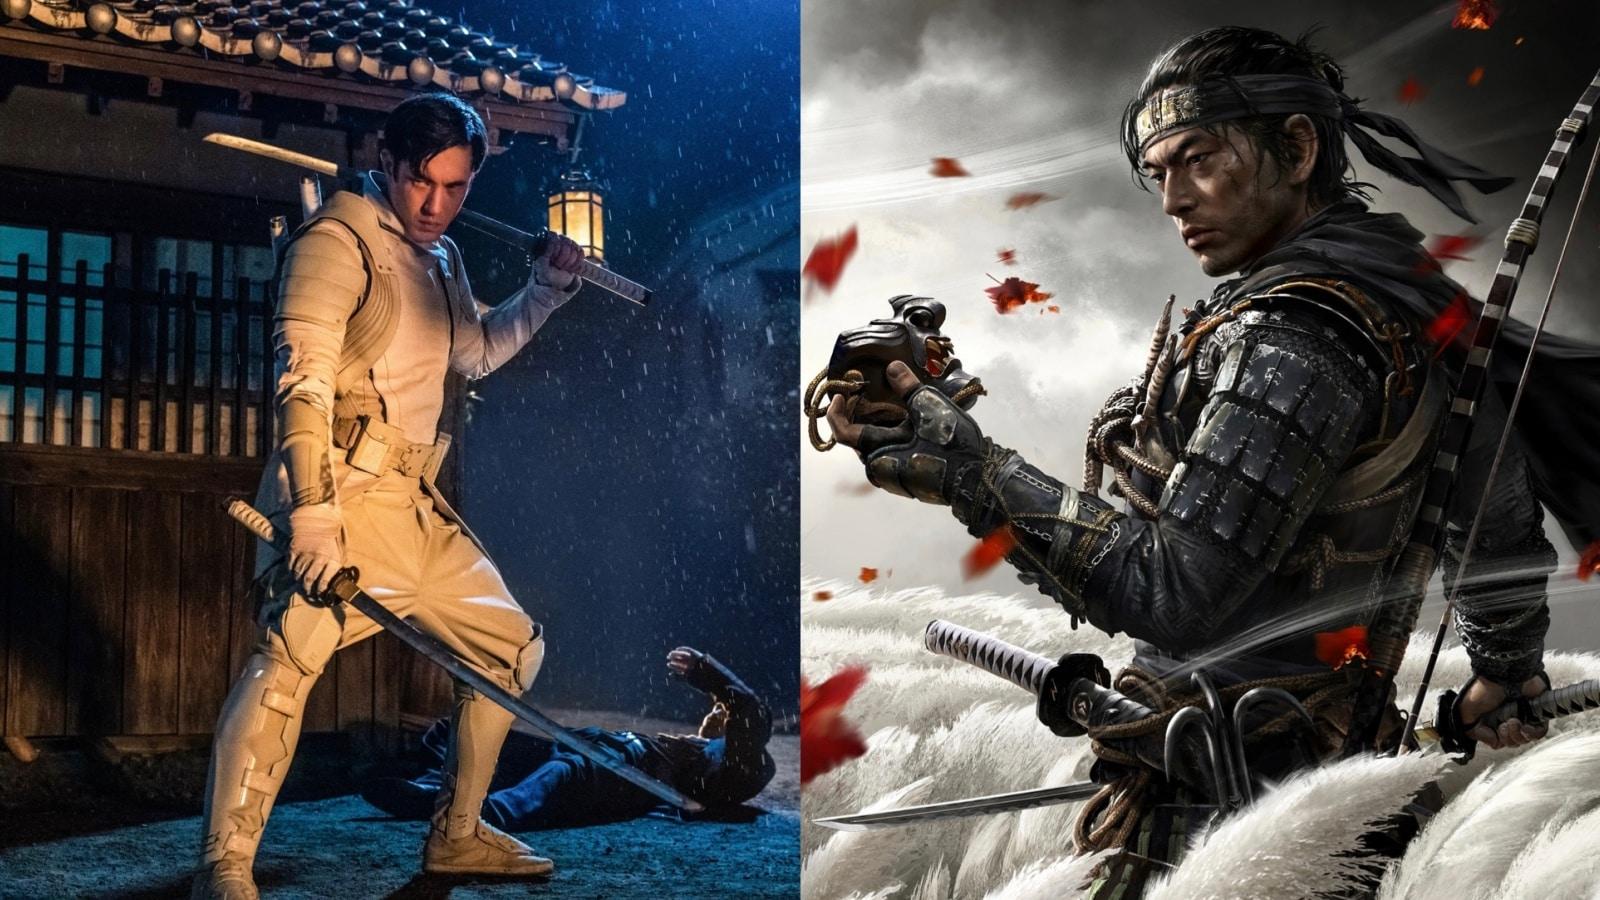 Snake Eyes actor 'going after' Jin Sakai role in Ghost of Tsushima